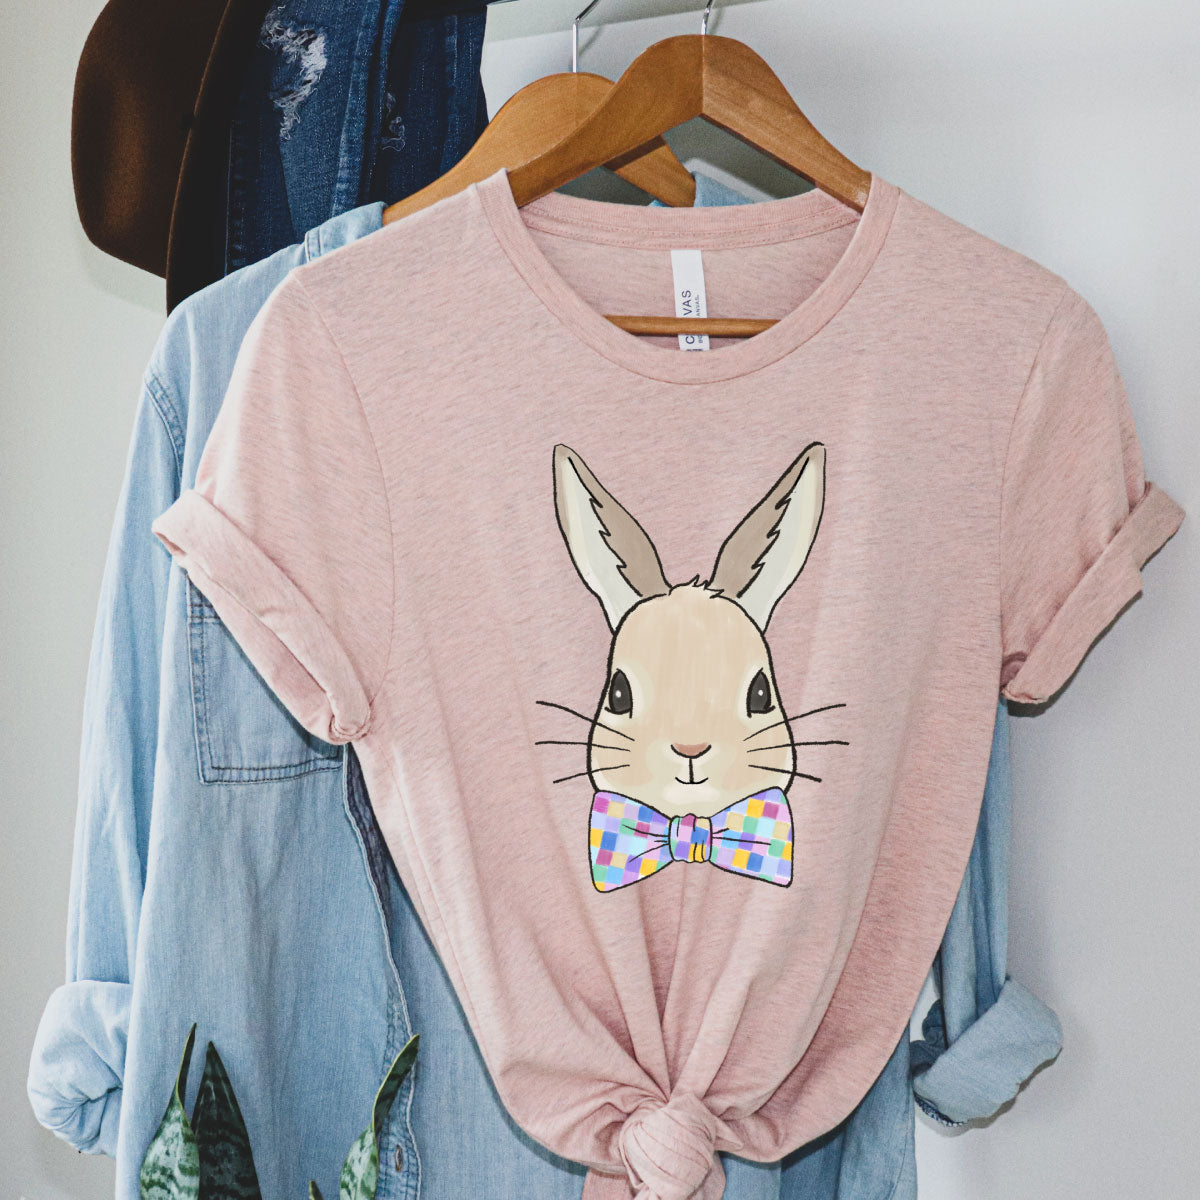 Heather pink tee with a graphic of a bunny wearing a bowtie with multicolored squares on it